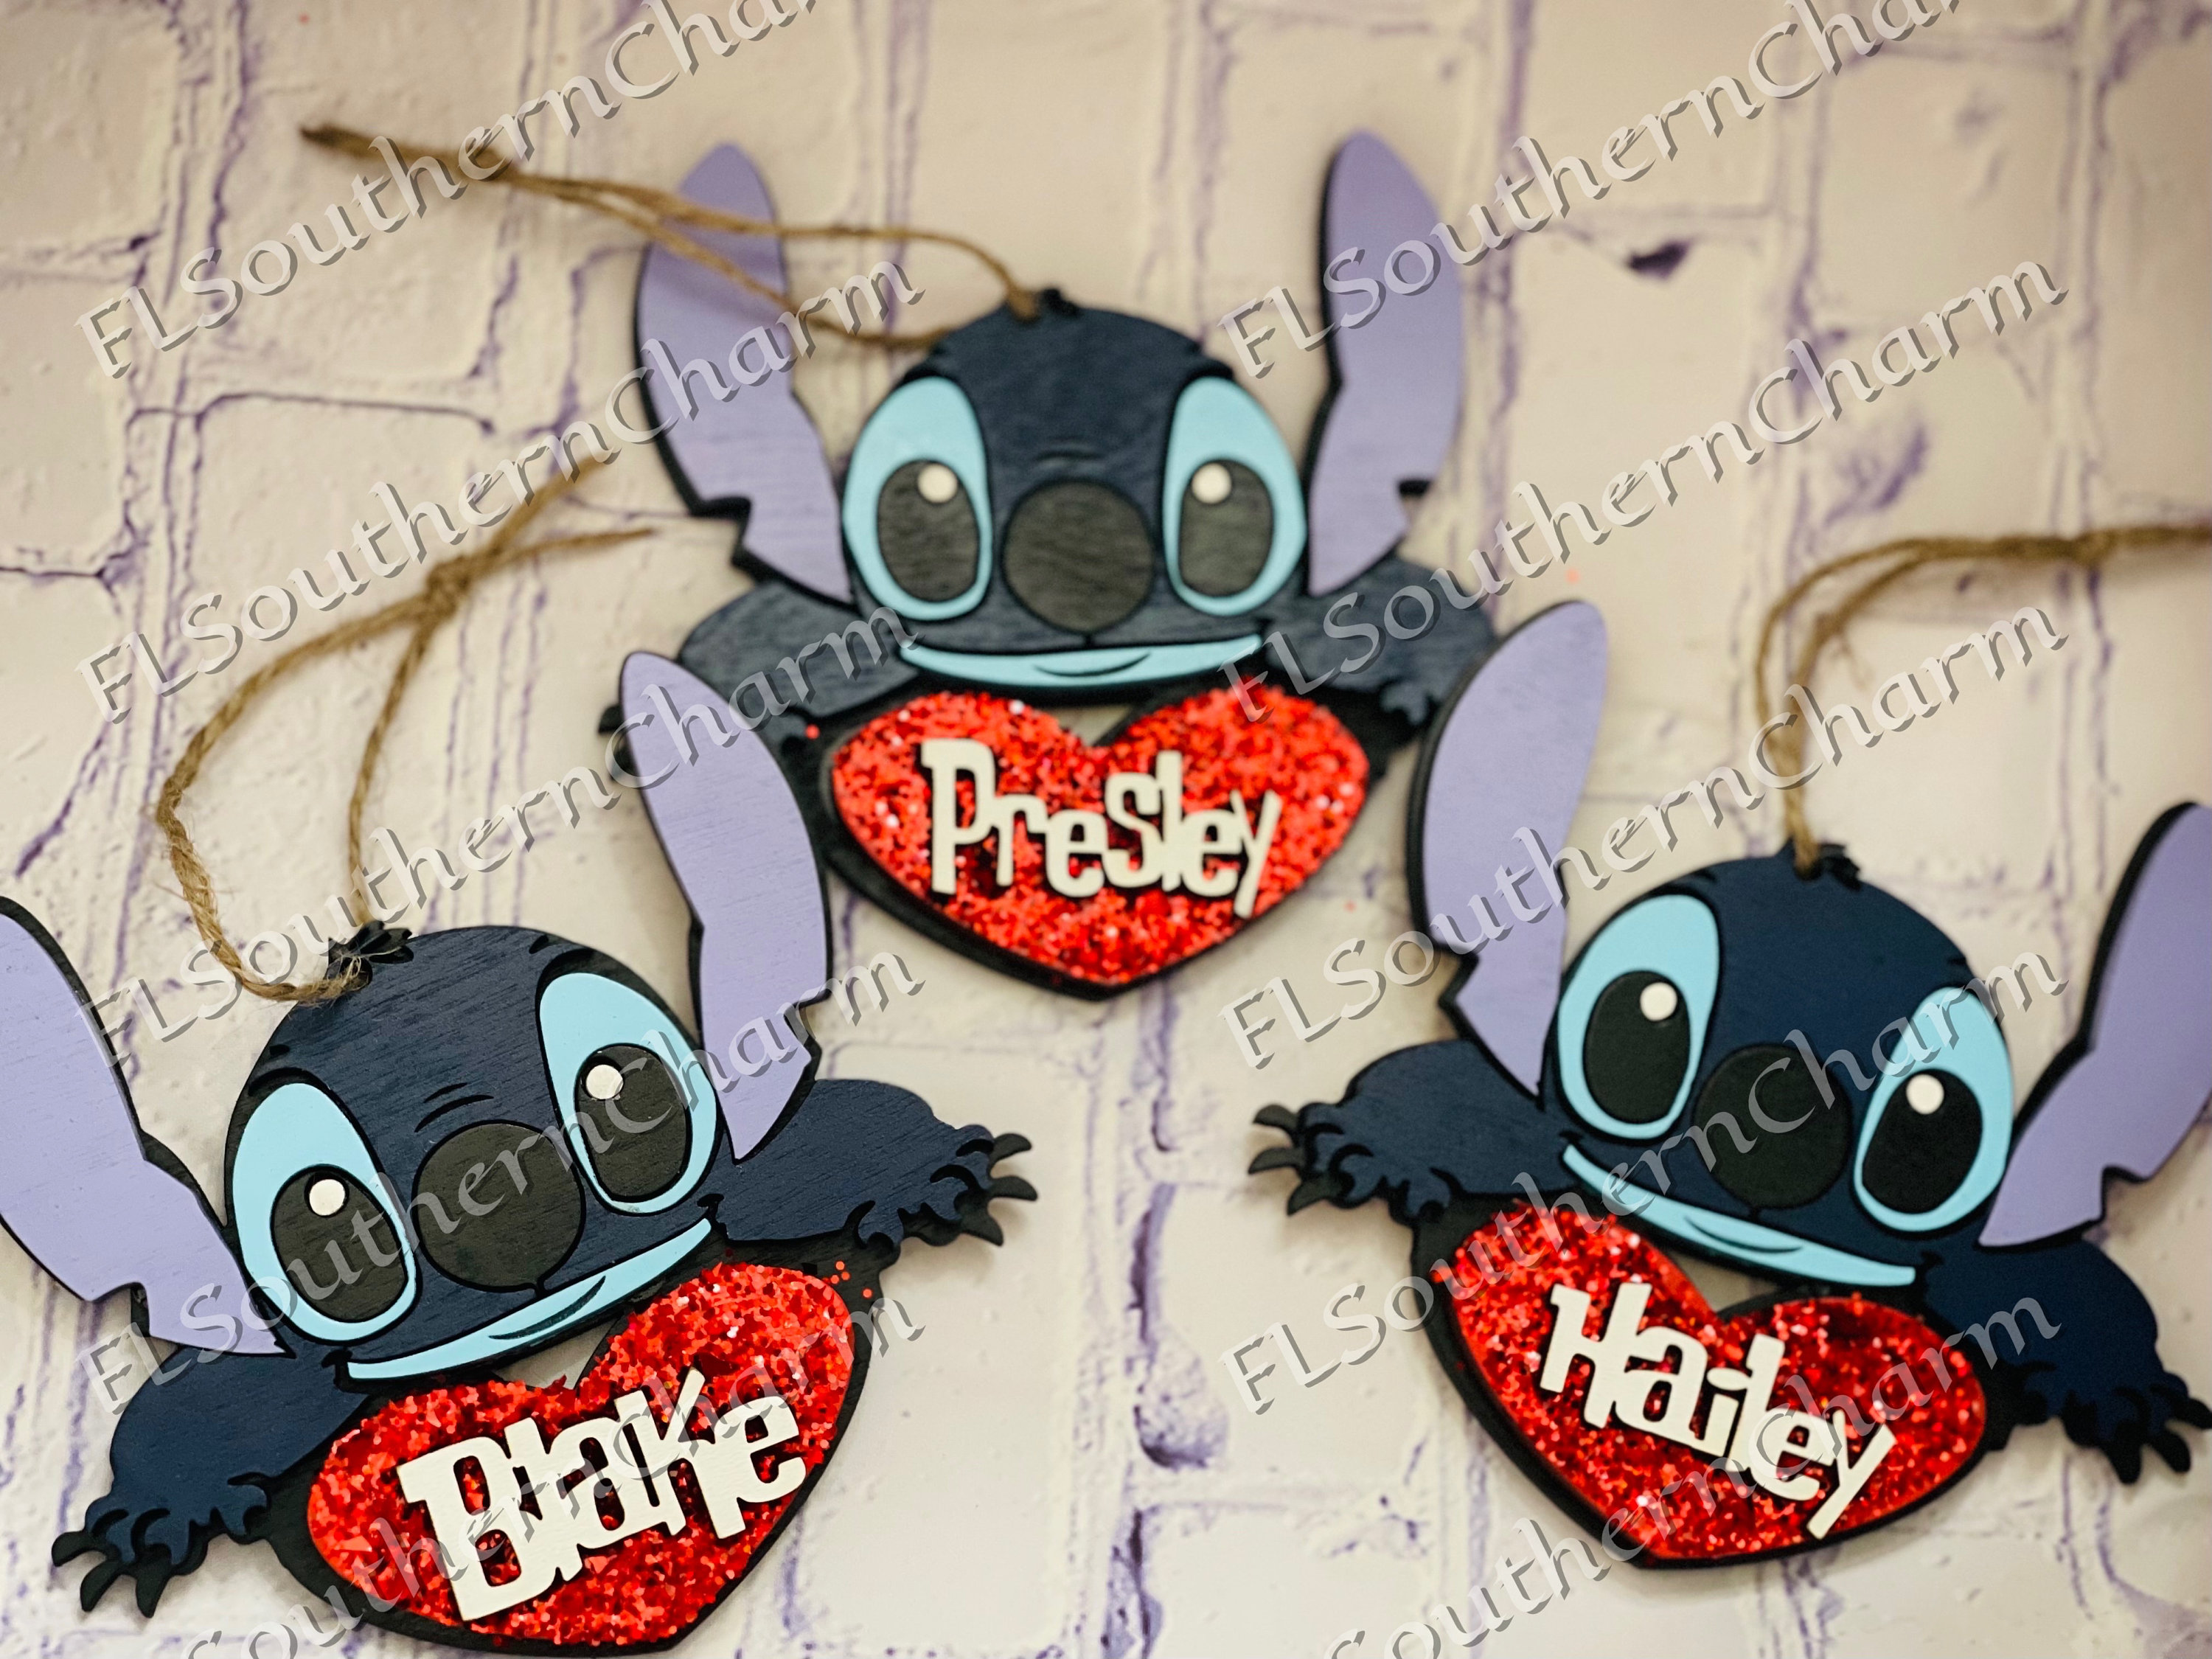 Lilo & Stitch Cutouts, Lilo, Stitch, Lilo Stitch Yard Signs, Lilo and Stitch  Background, Lilo and Stitch Party Theme, Lilo and Stitch Event 